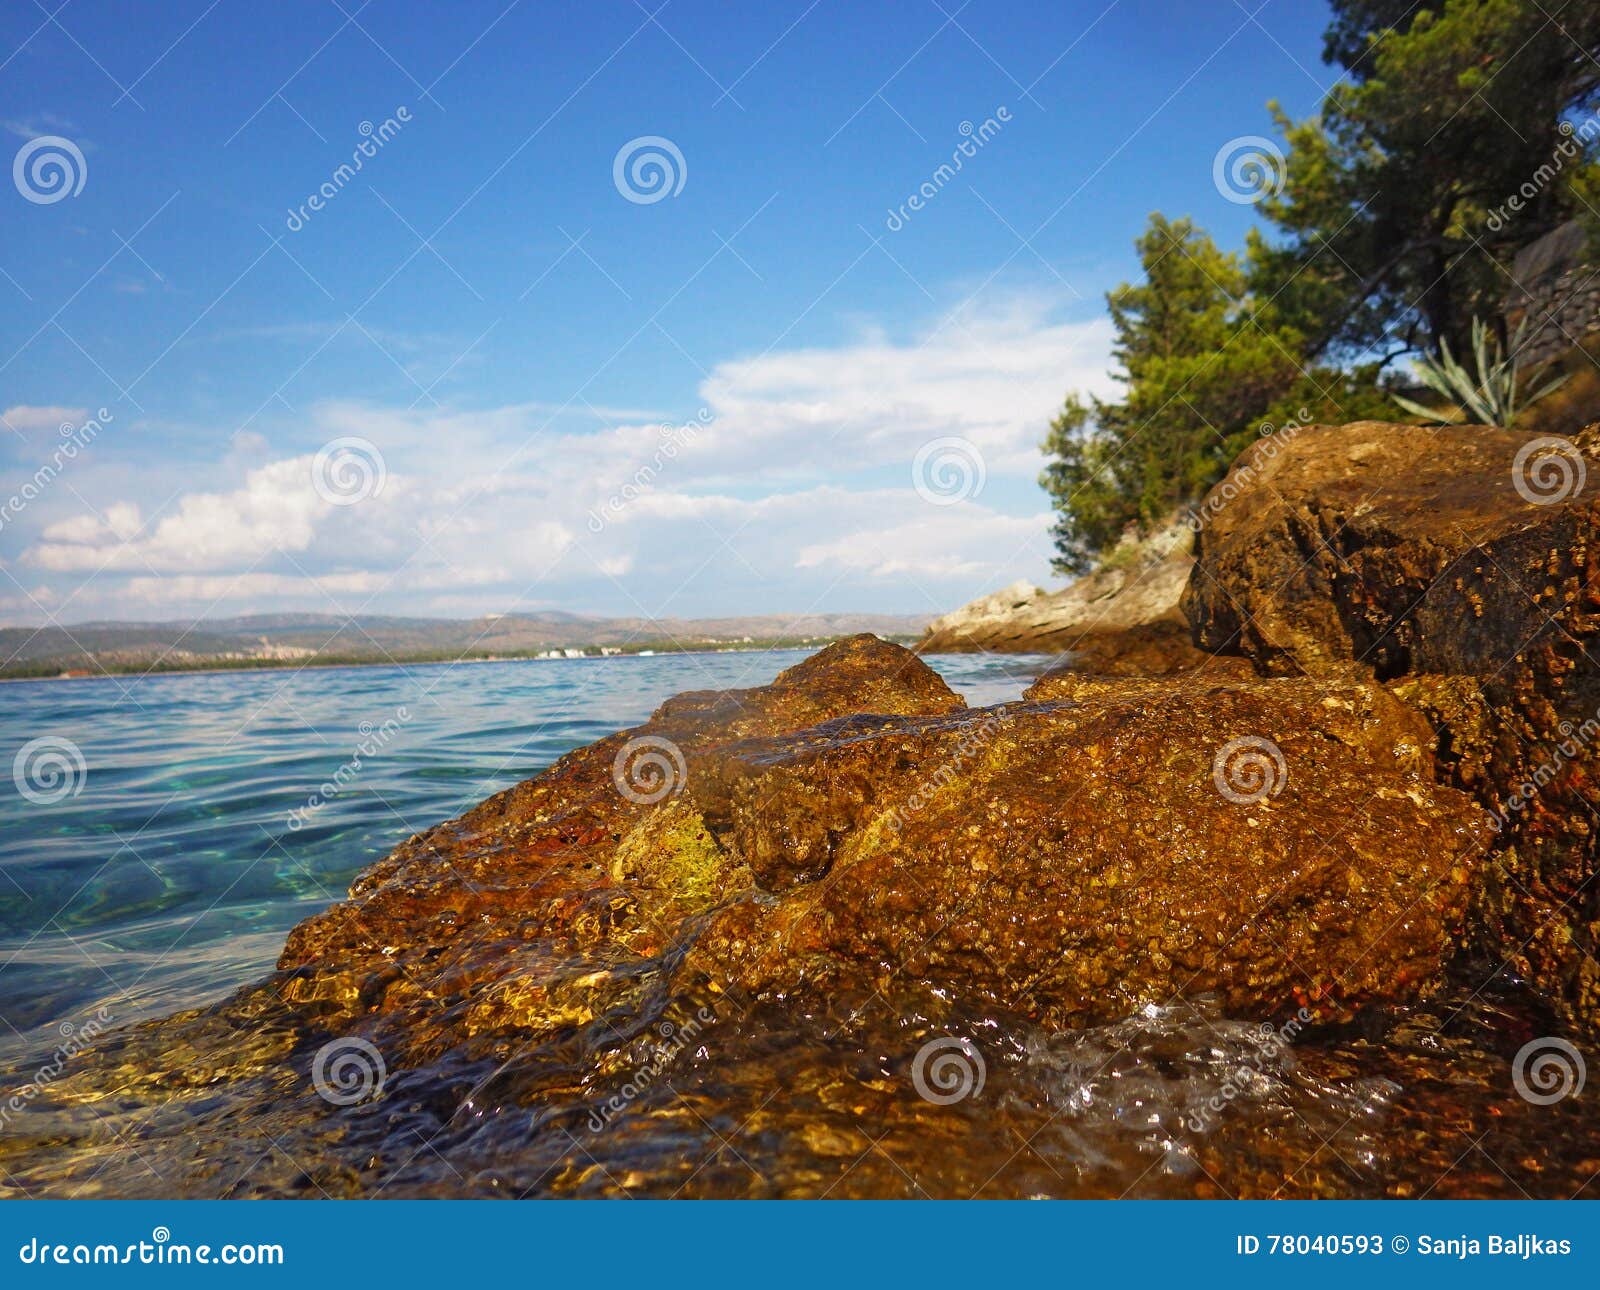 Golden rock near the sea stock image. Image of europe - 78040593